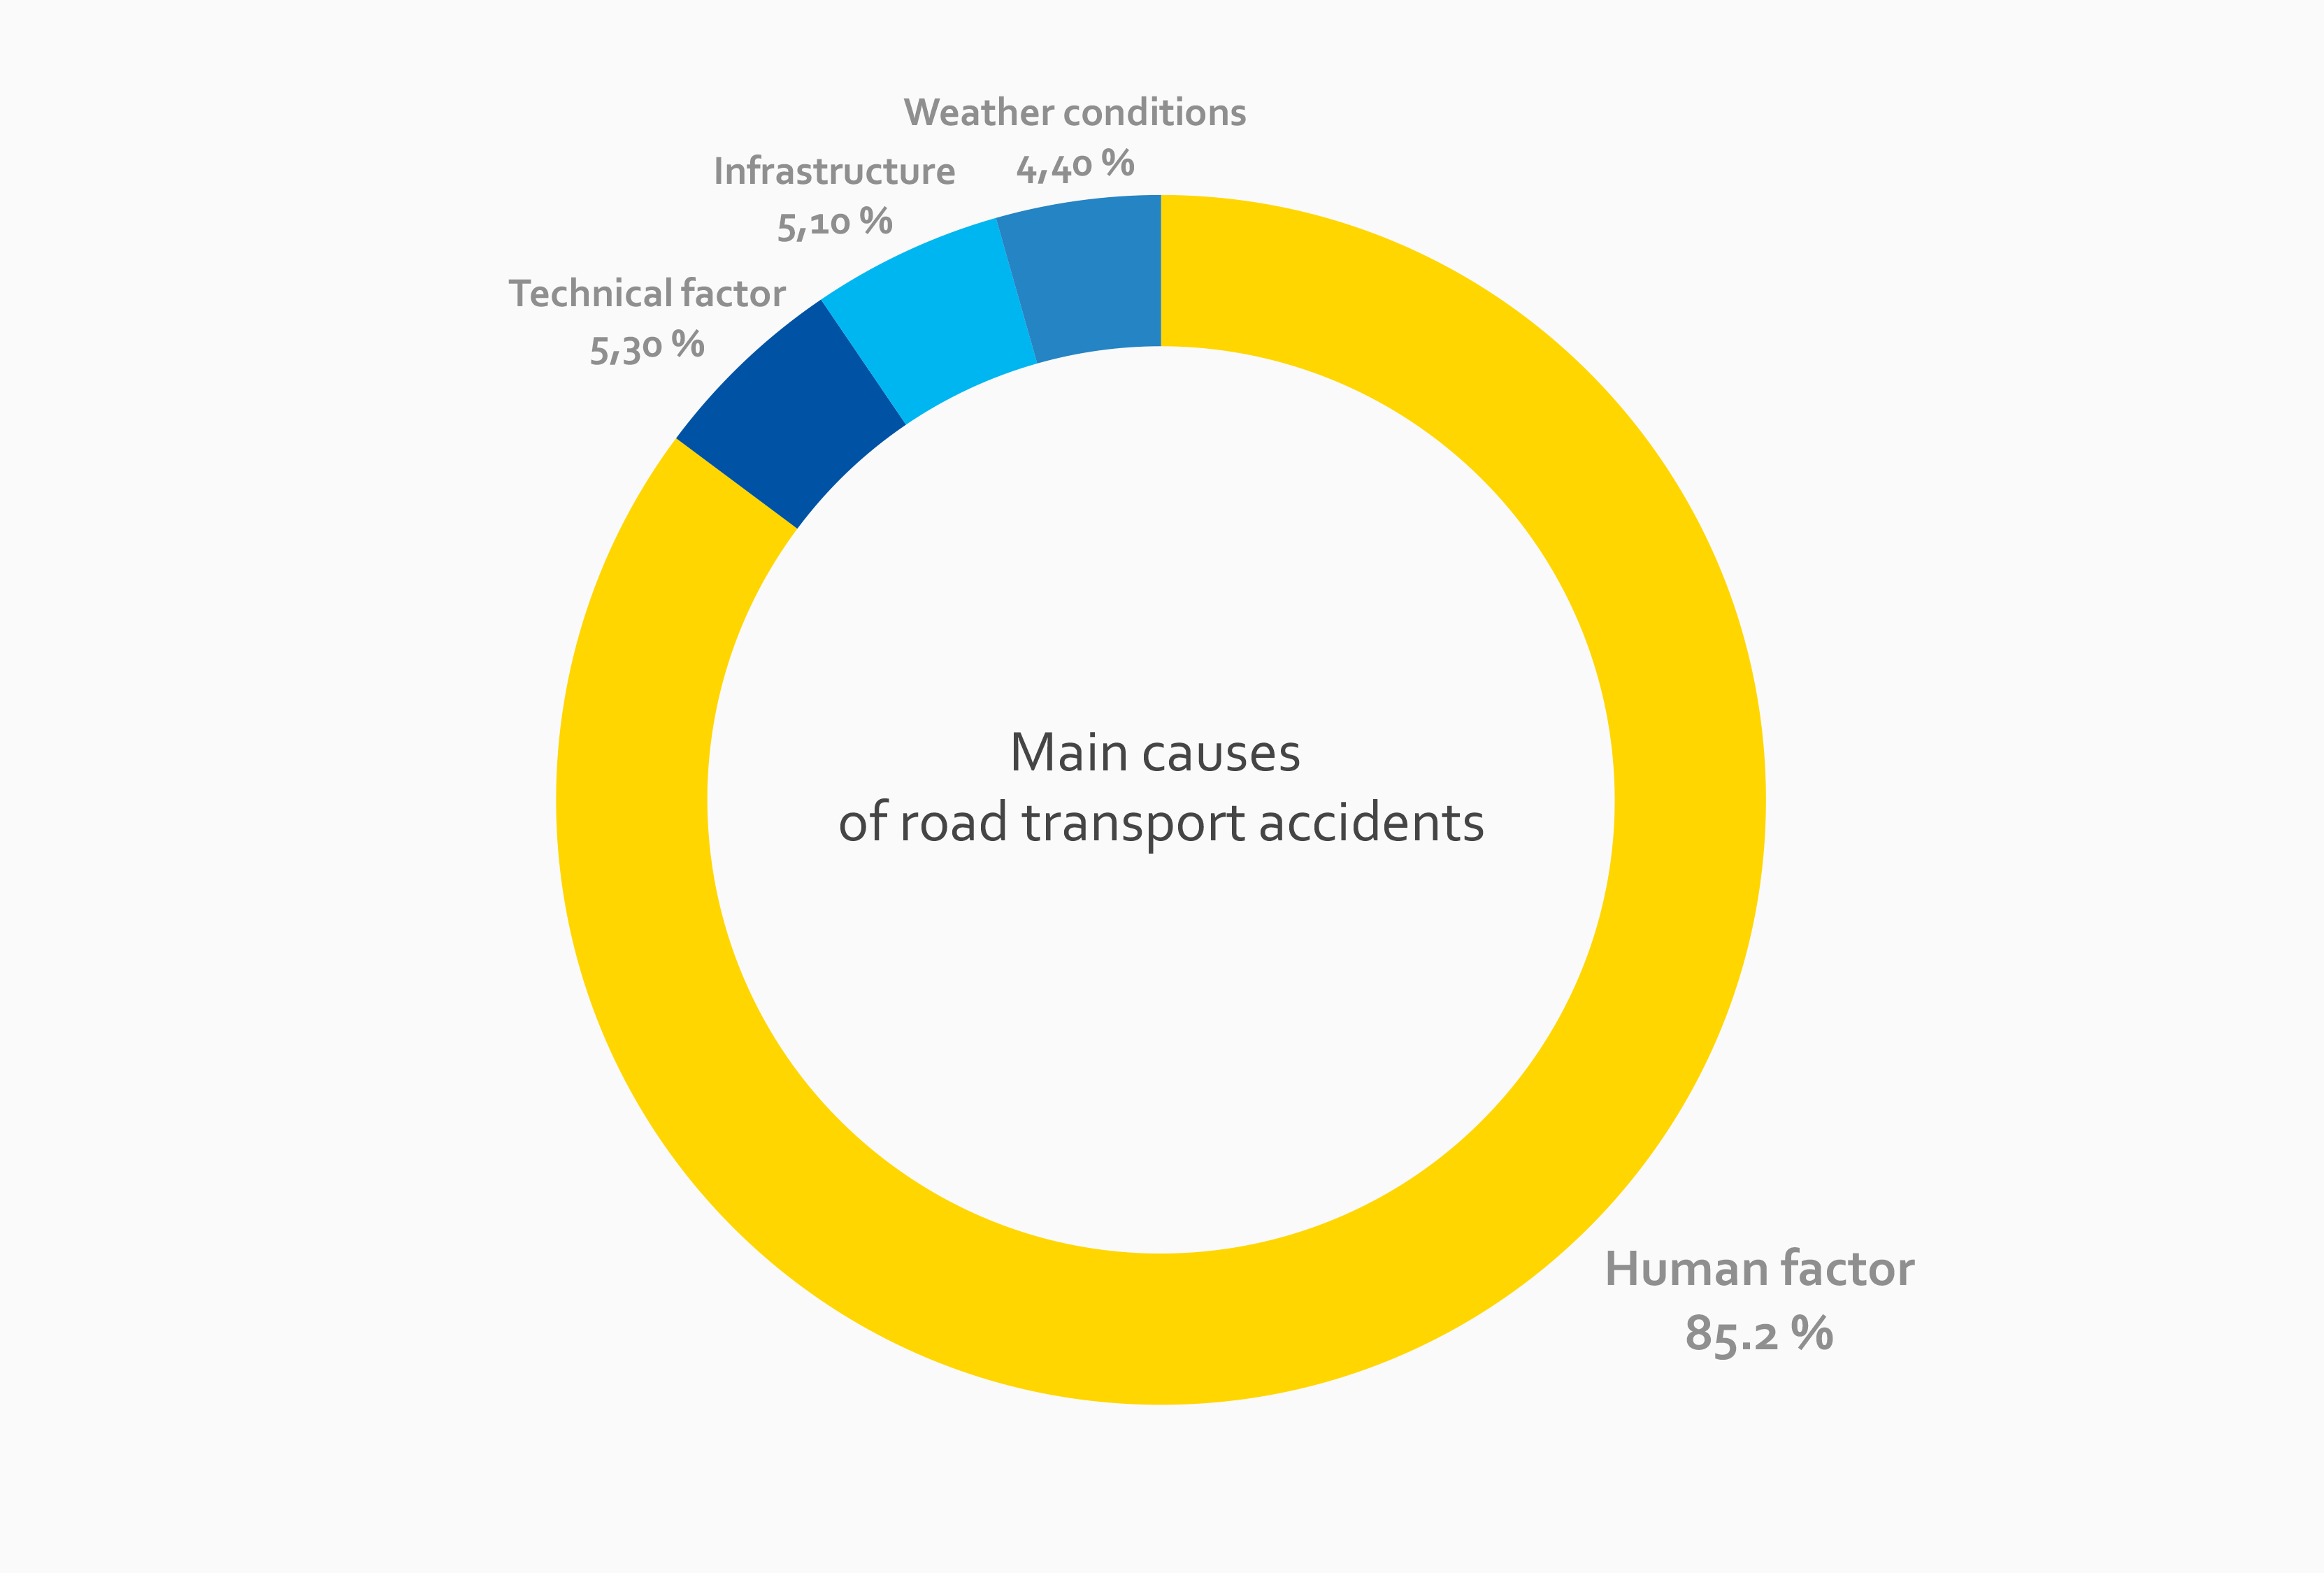 The main causes of road transport accidents